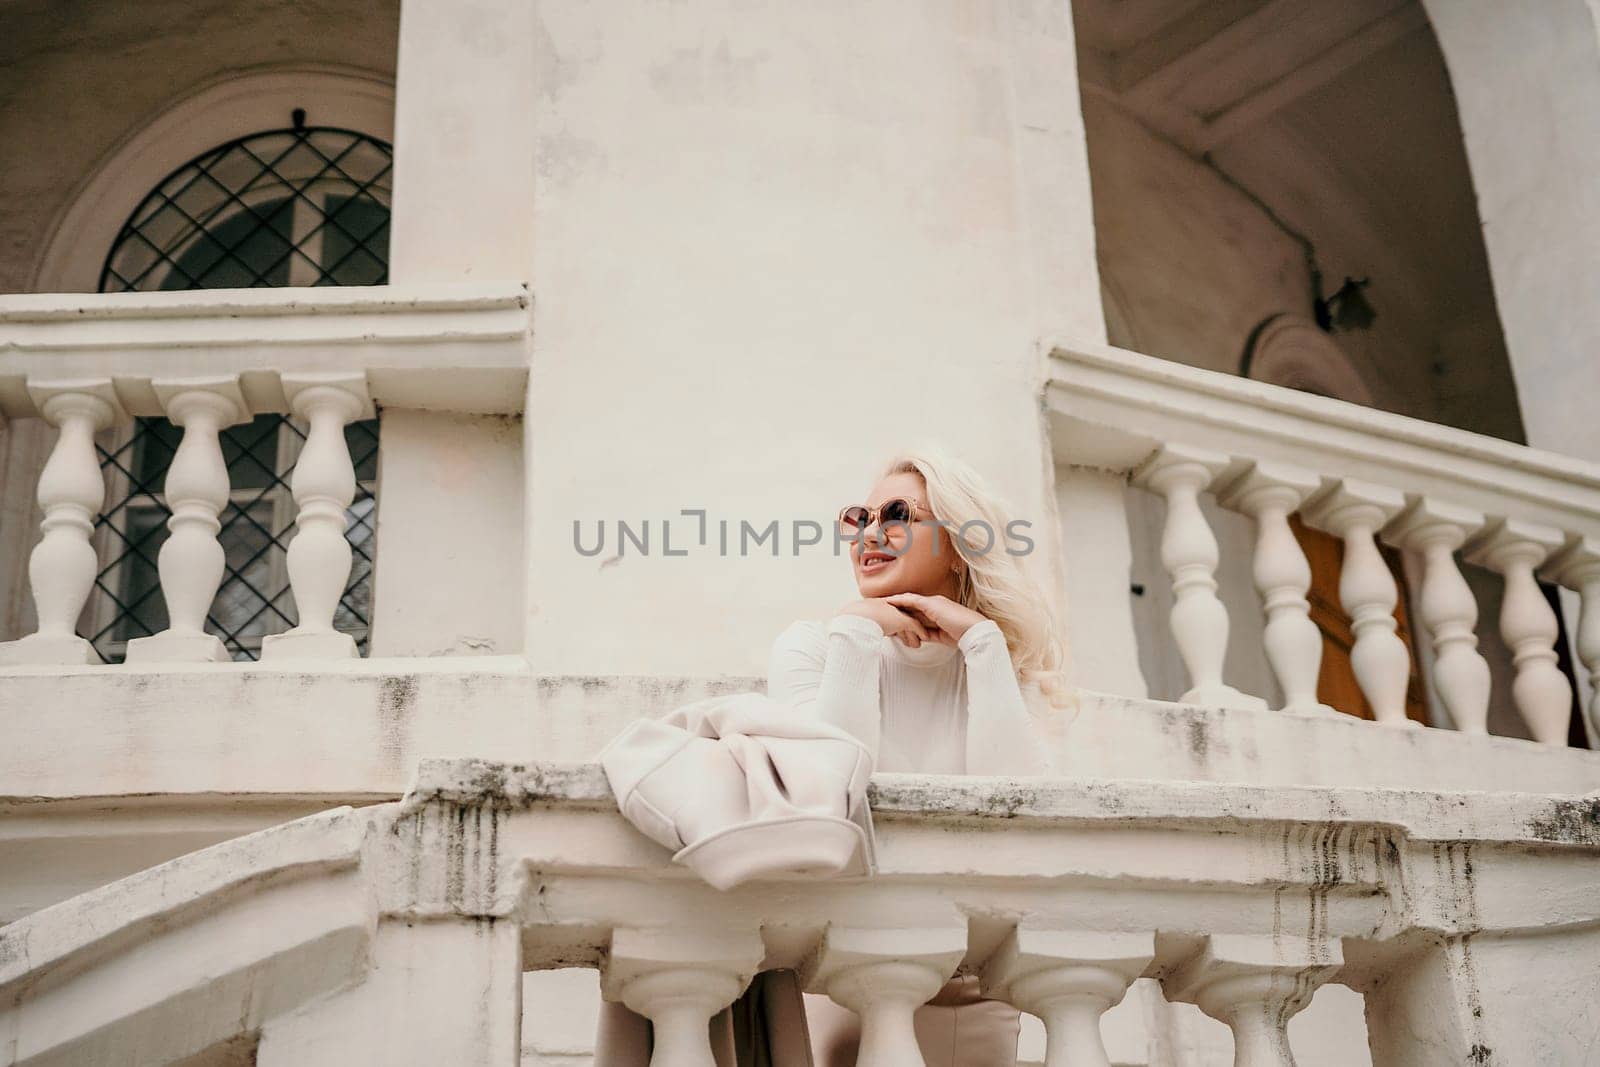 A woman is sitting on a white railing, looking out at the street. She is wearing sunglasses and a white shirt. The scene is set in front of a building with white pillars. by Matiunina